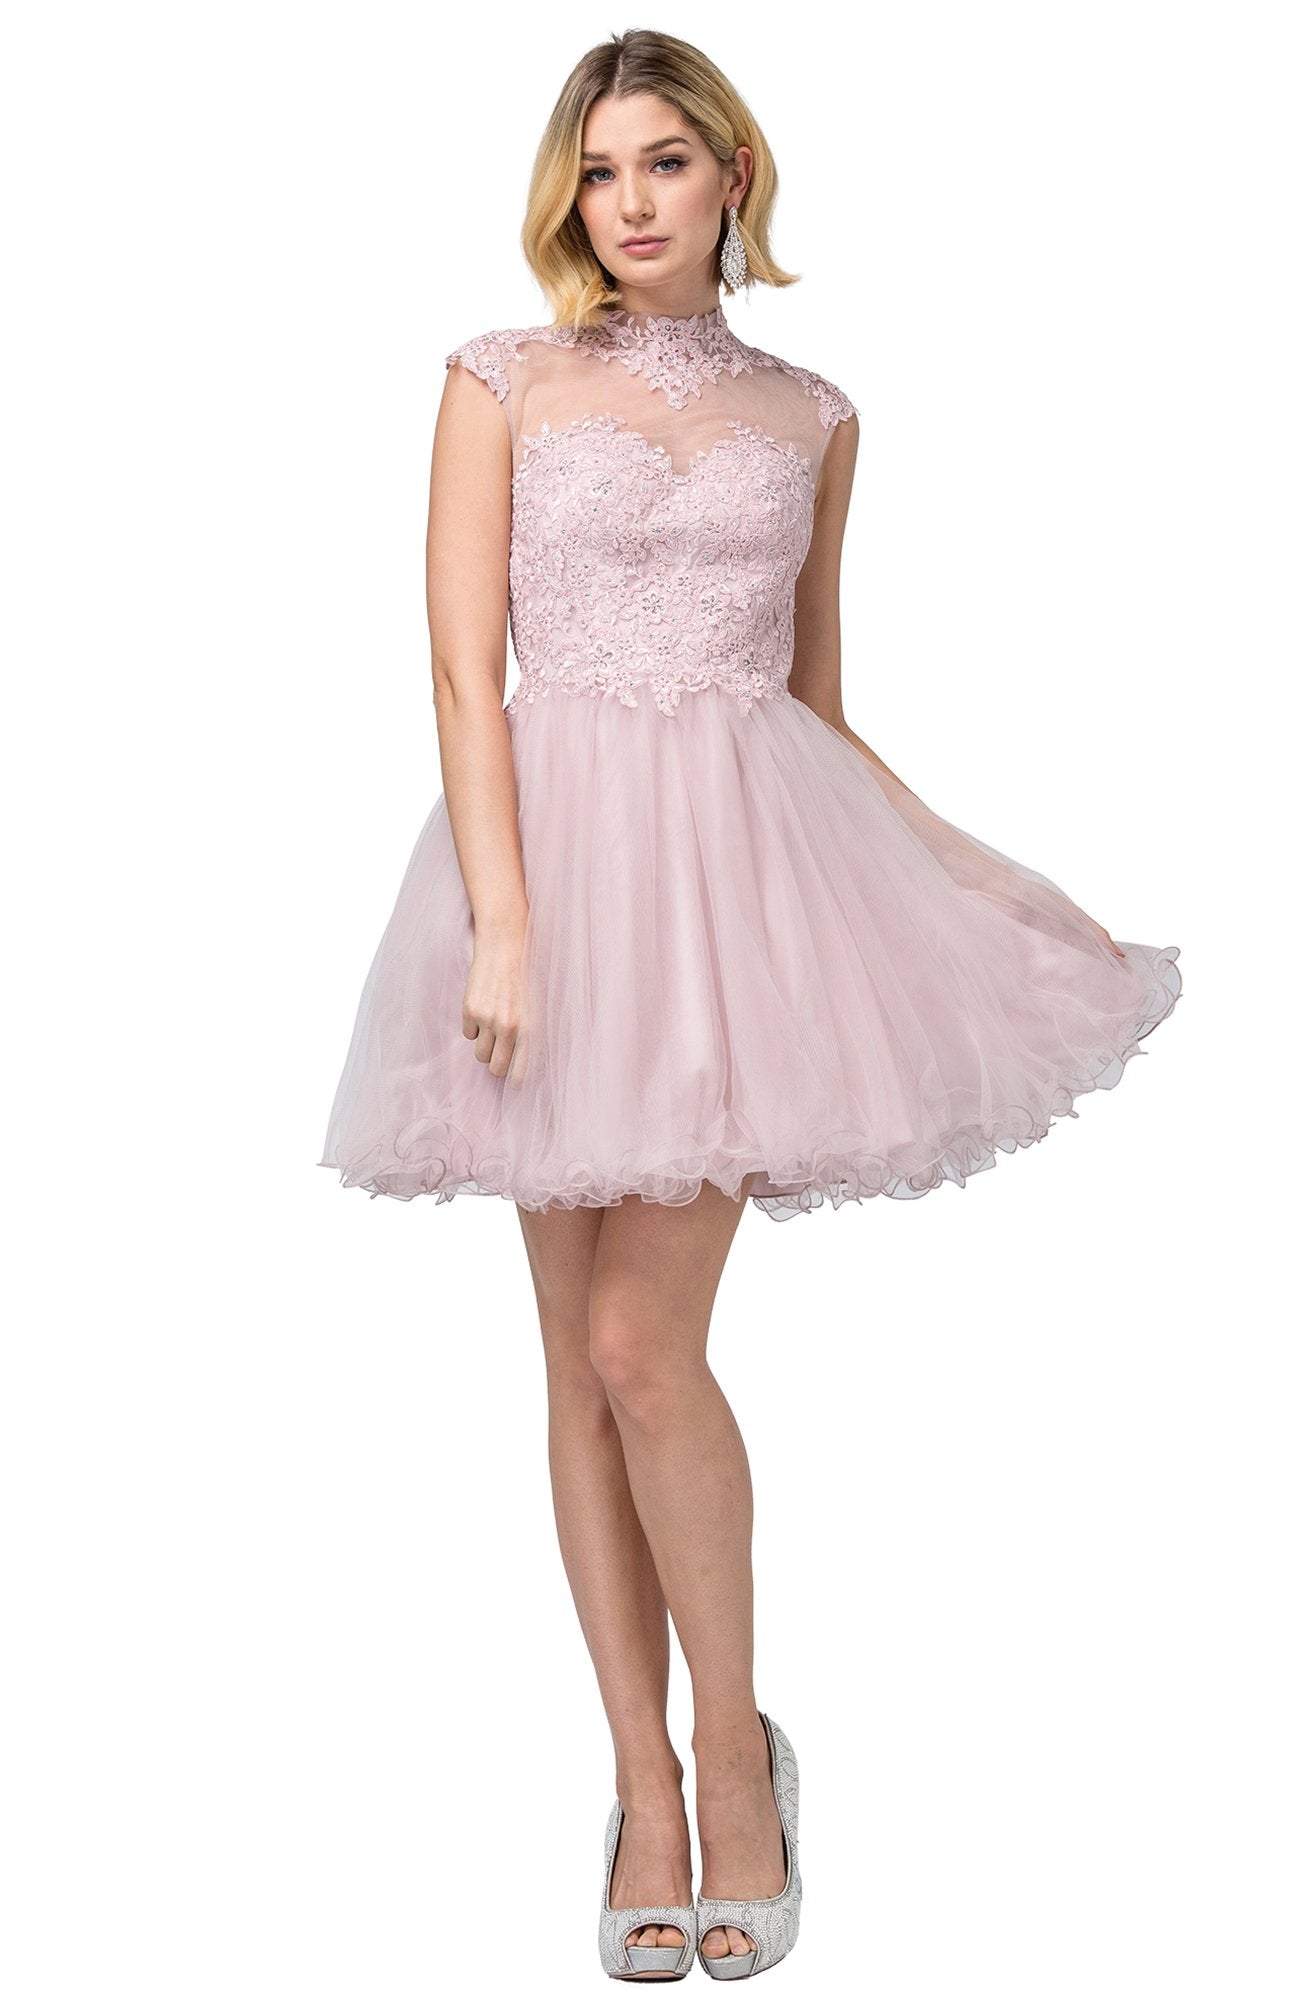 Dancing Queen - 3027 Beaded Lace High Neck A-Line Dress In Pink